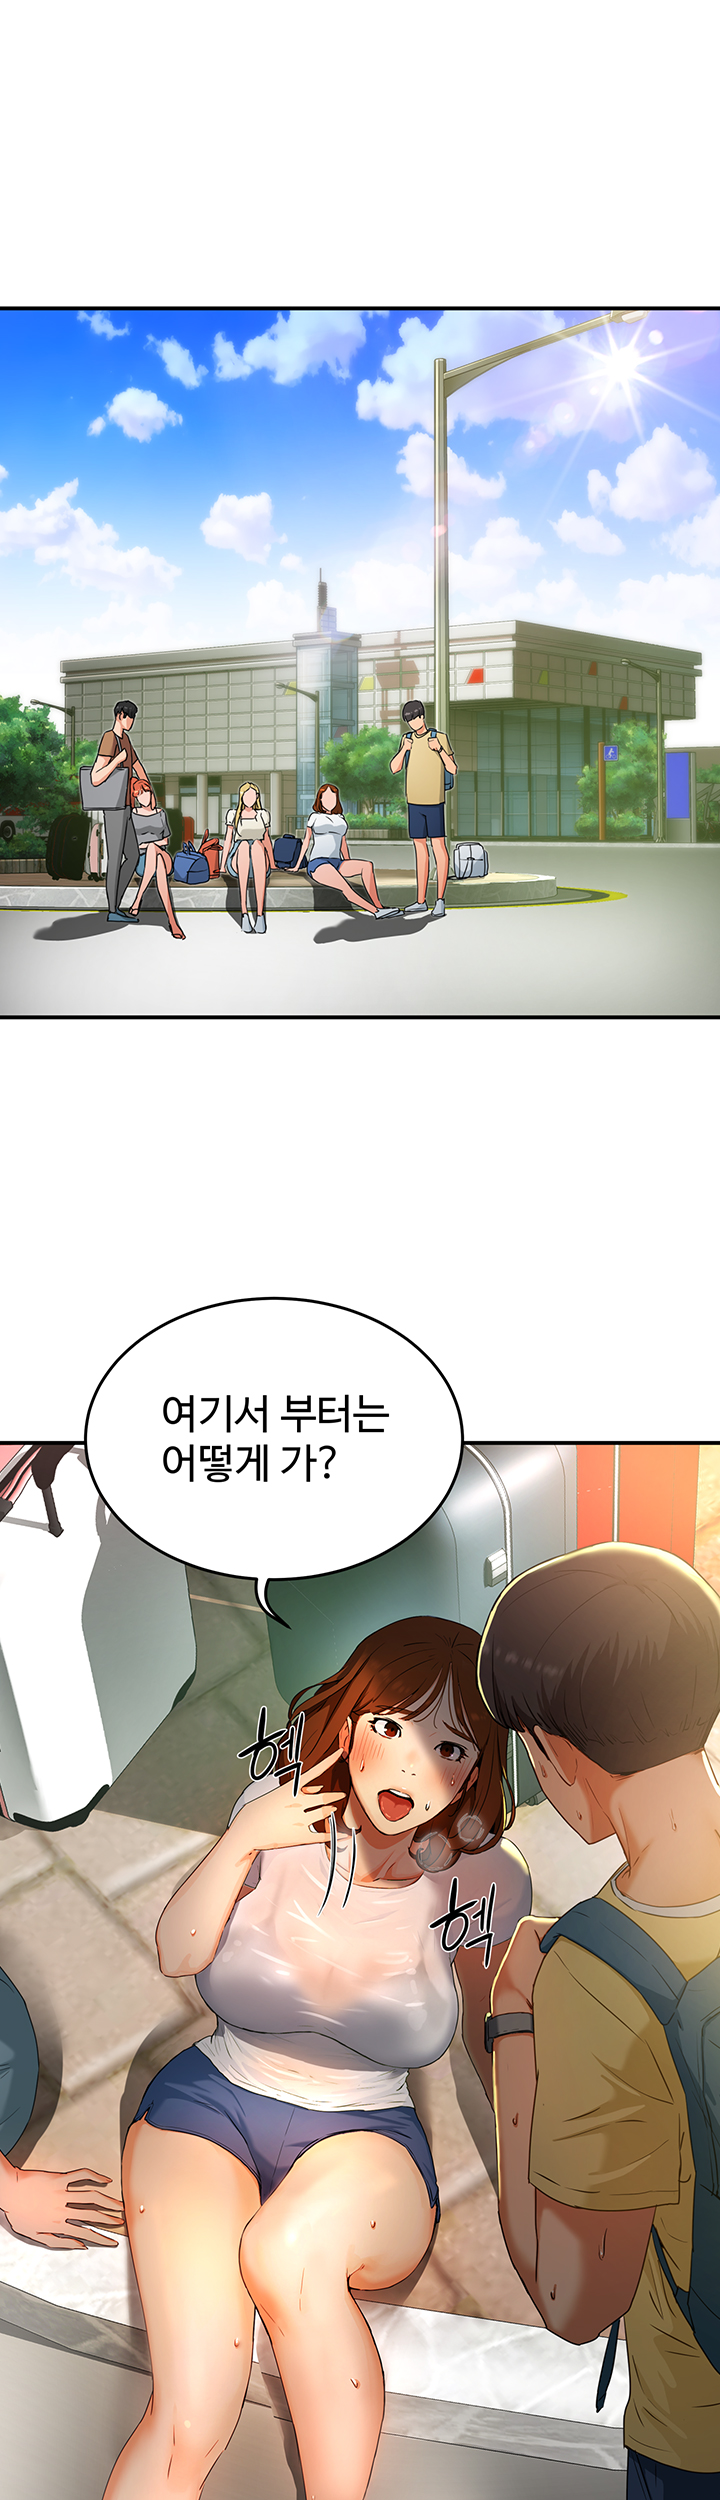 In The Summer Raw - Chapter 1 Page 16